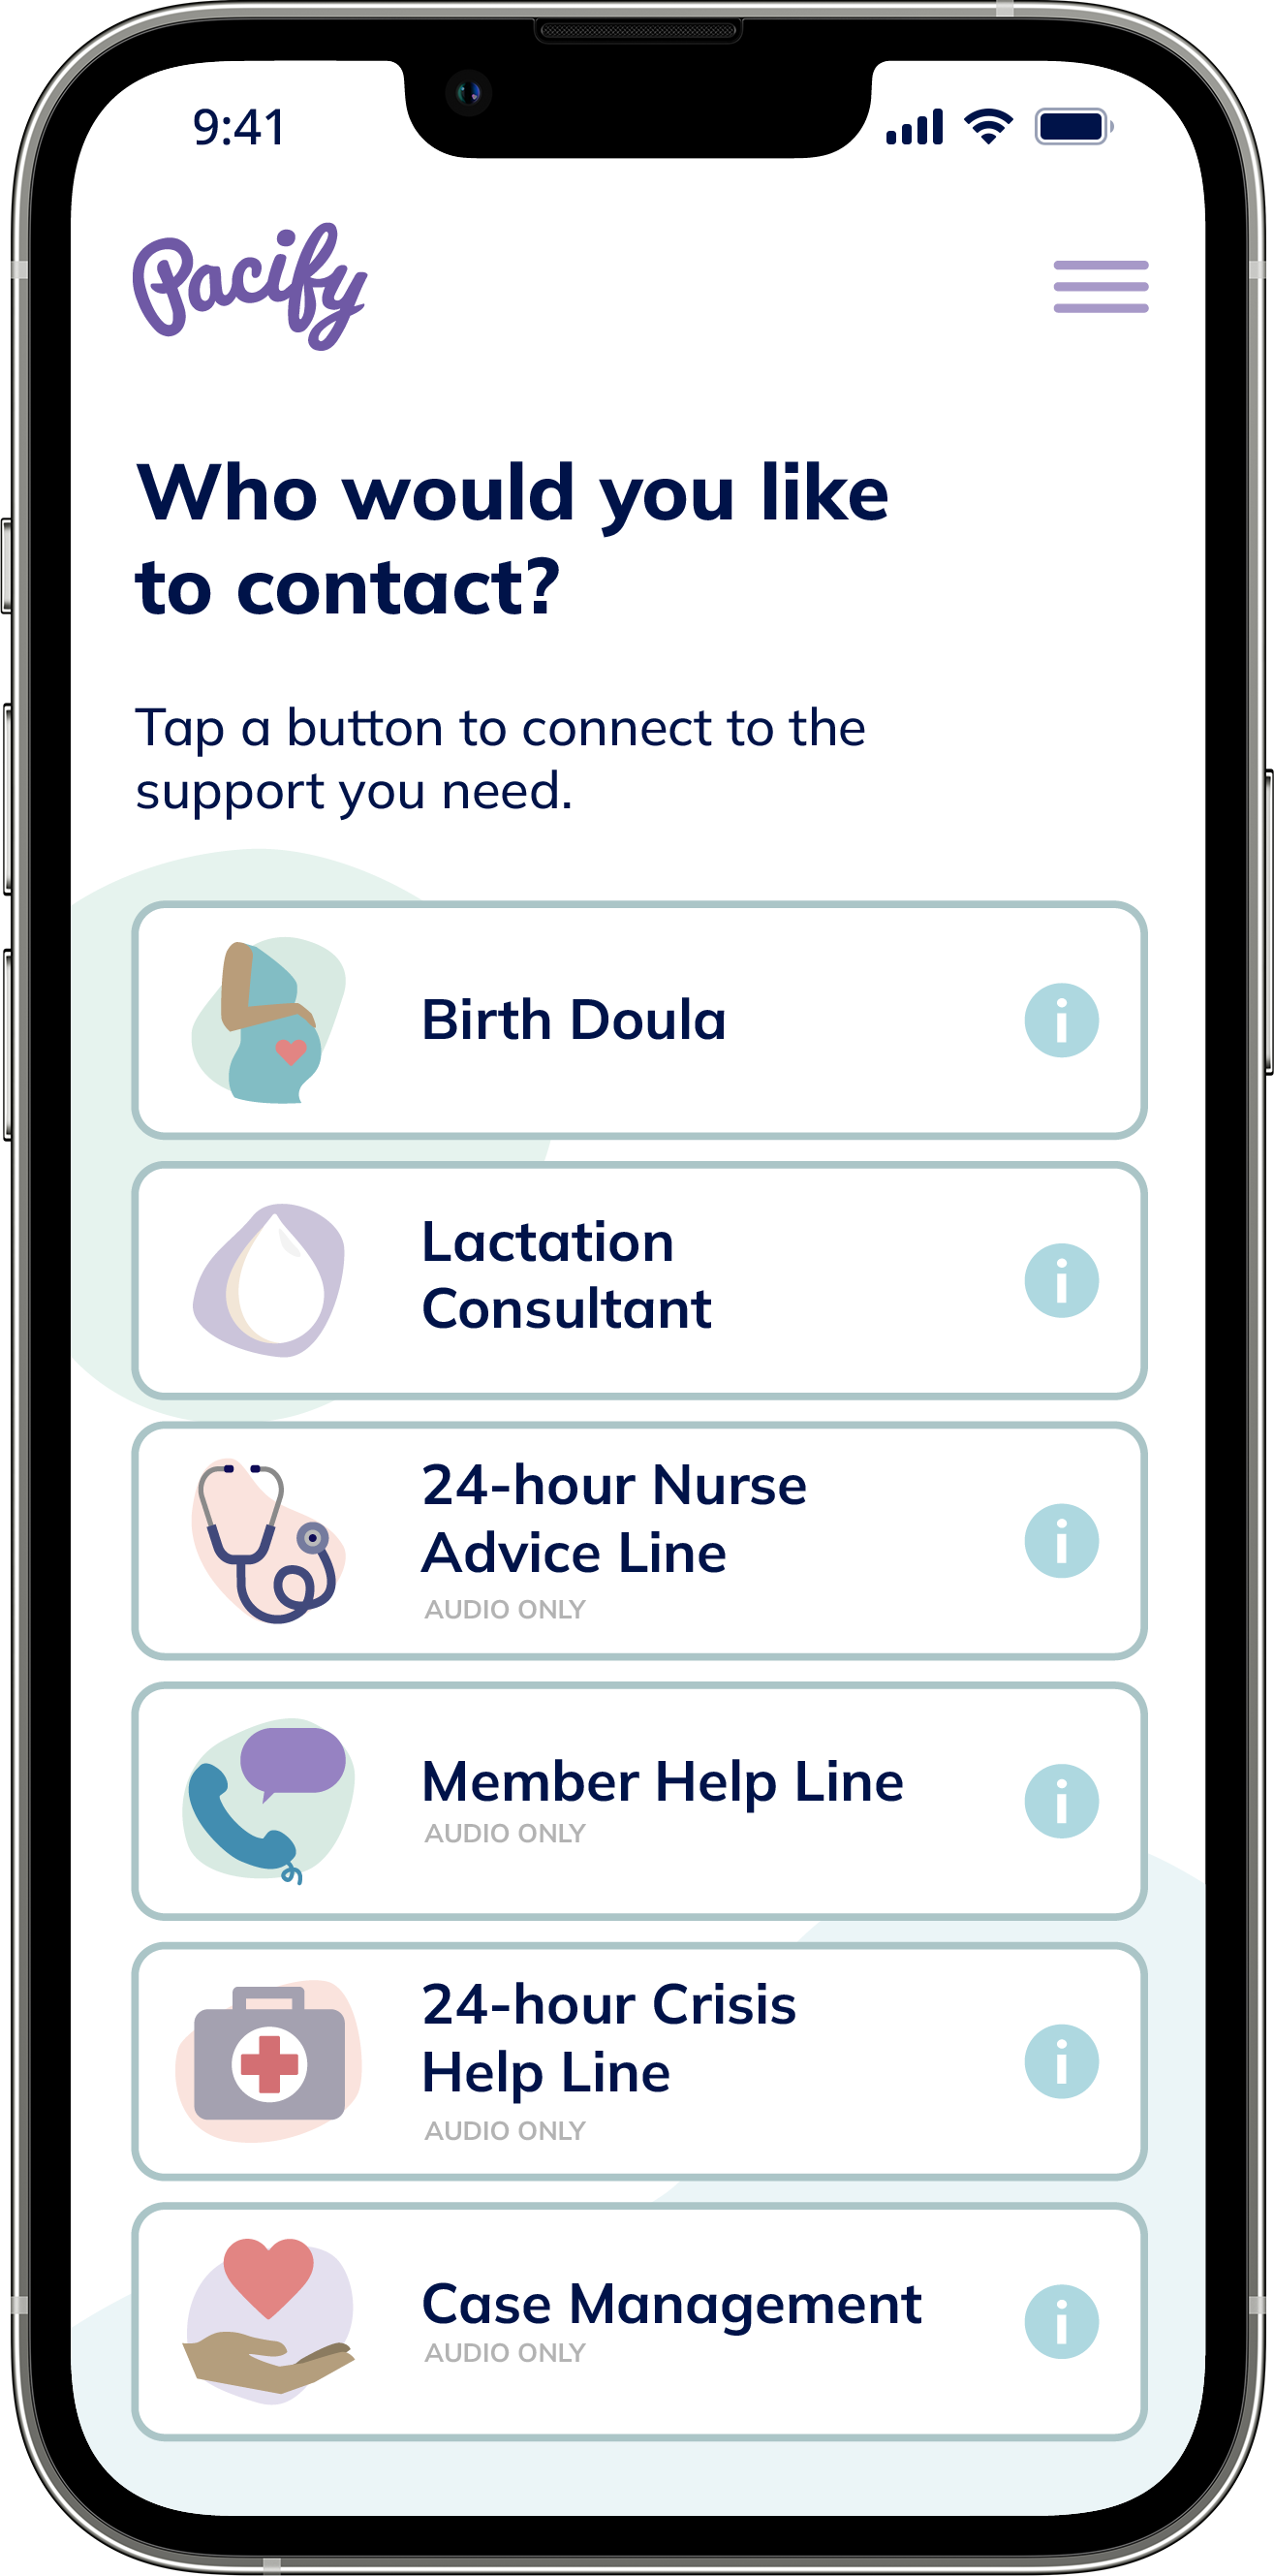 Pacify app home screen showing call options of Lactation Consultant, 24-hour Nurse Advice Line, Molina Case Management, Molina Member Services, and Molina Behavioral Health Crisis Line.